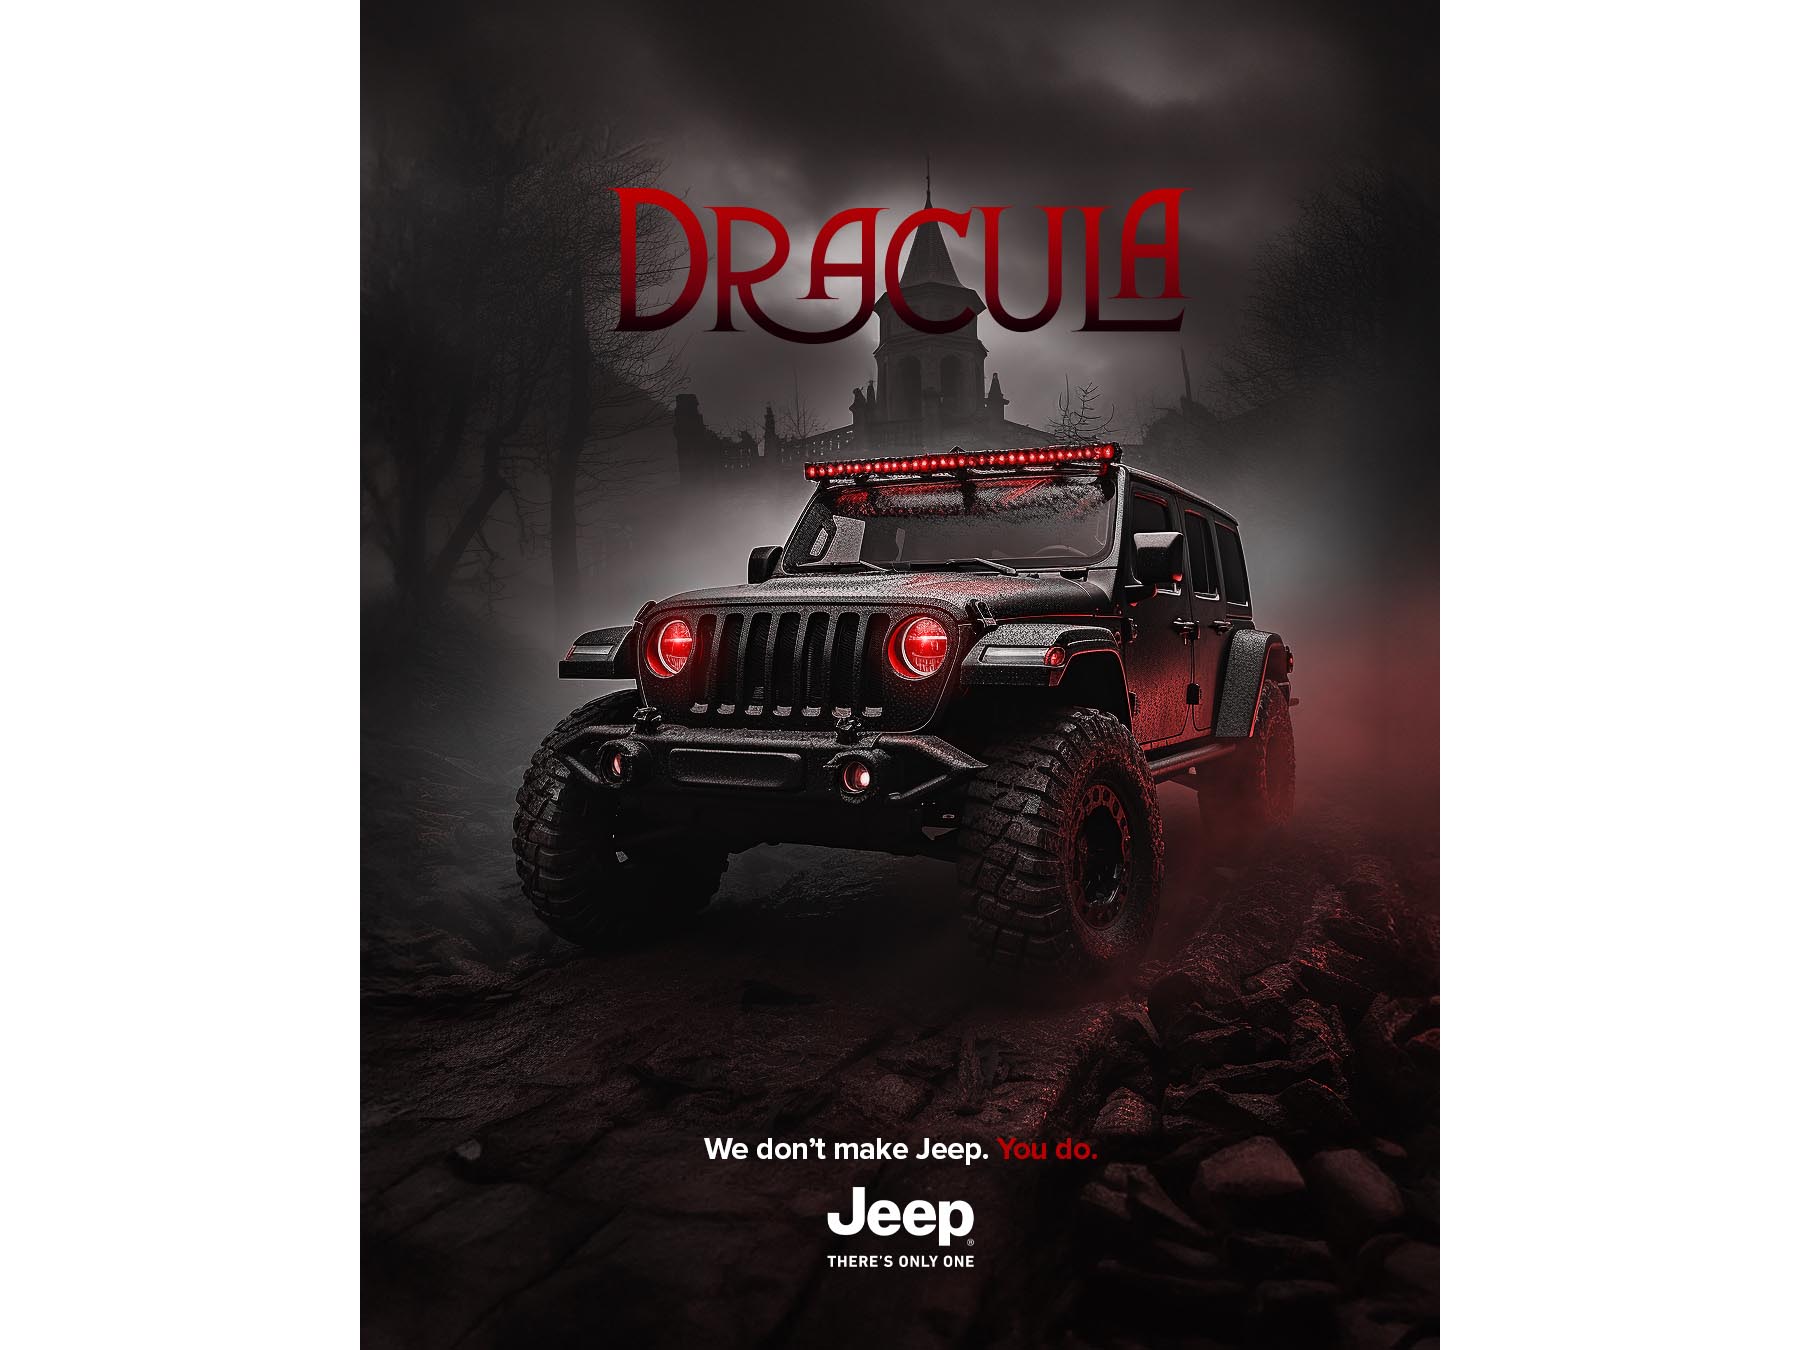 Publicis Middle East and Jeep Wrangler tap into the Halloween vibe